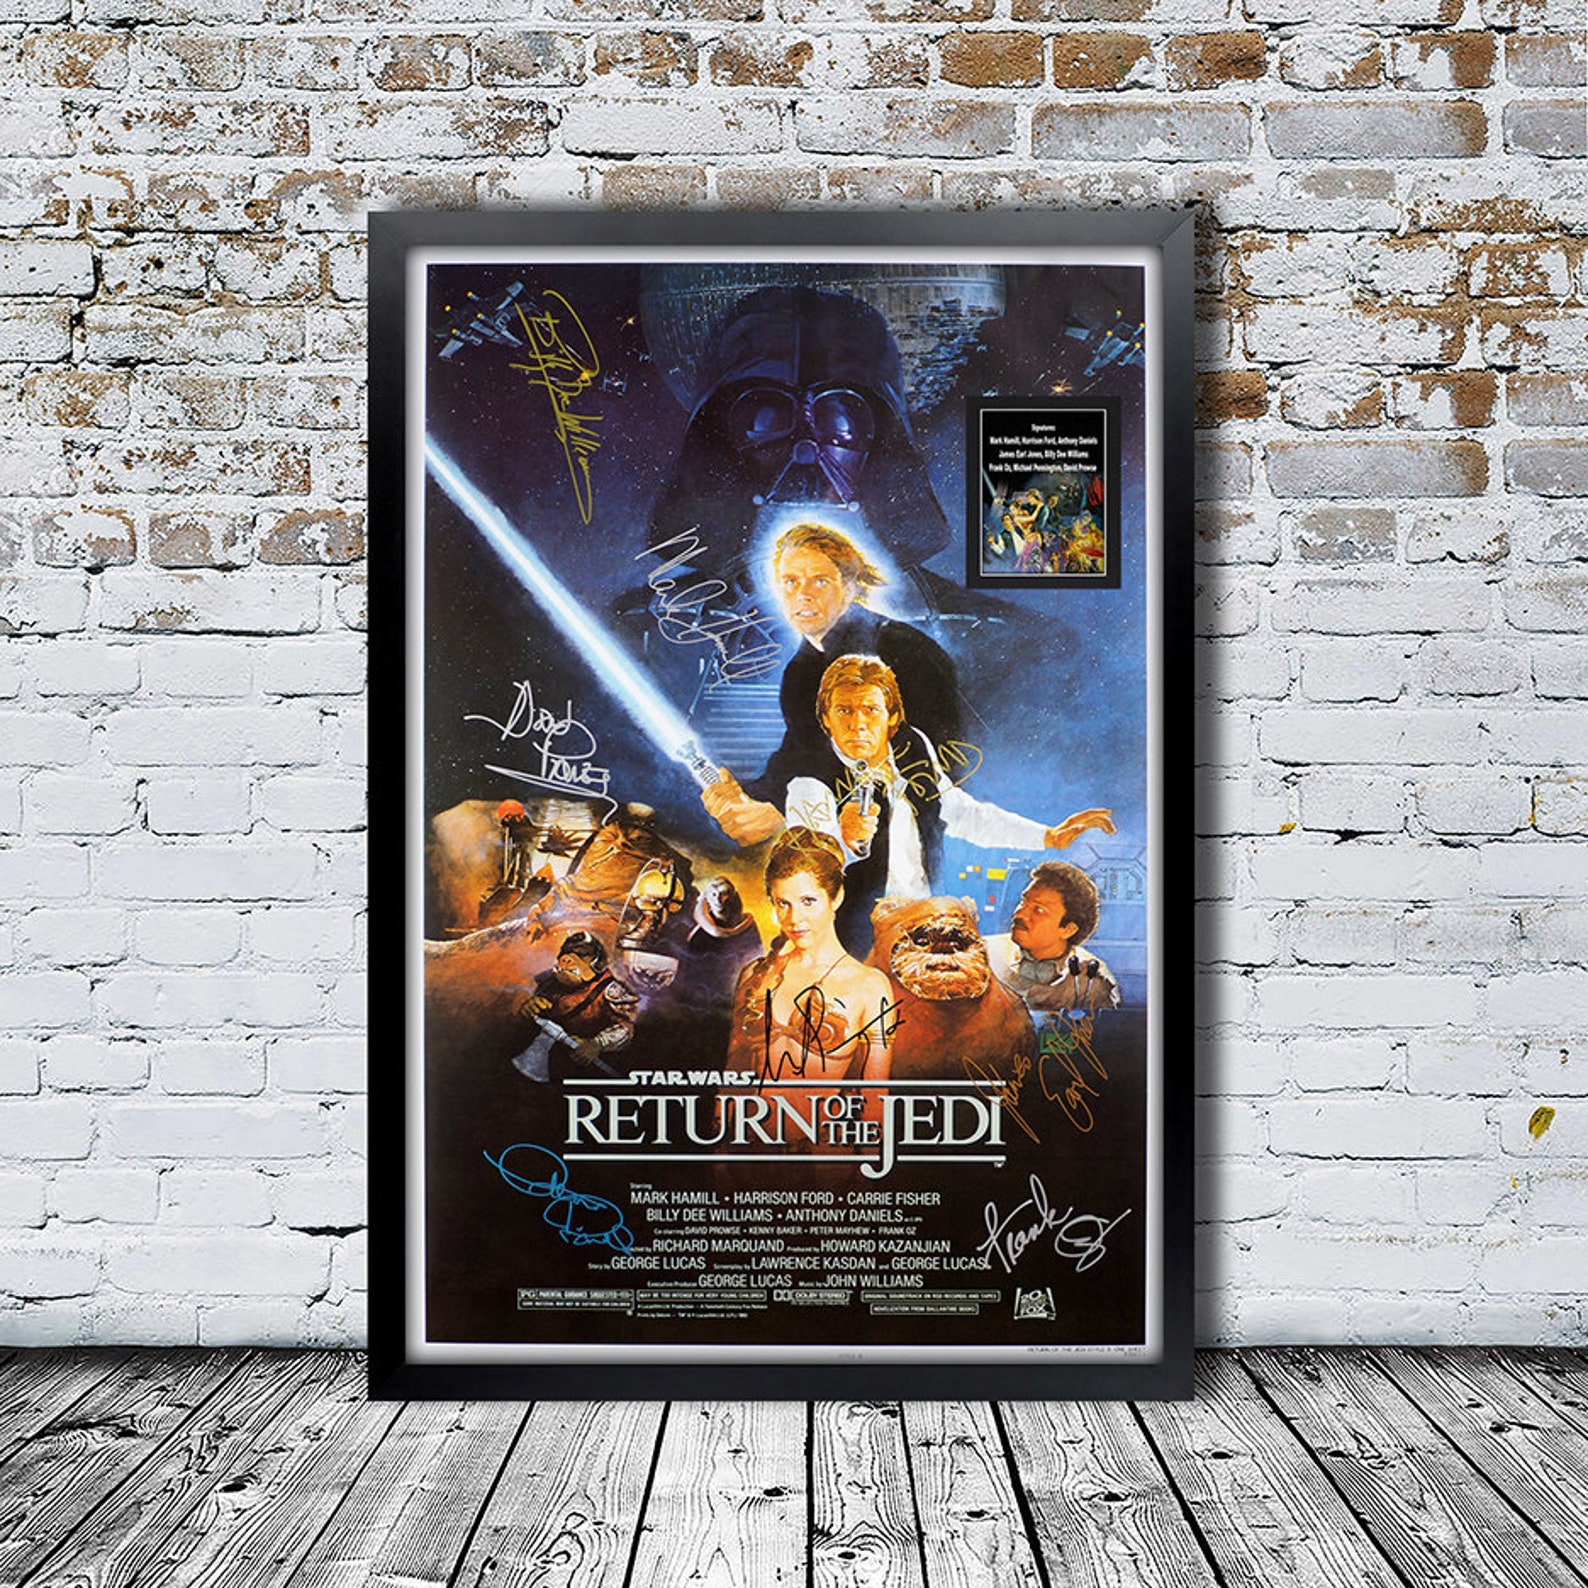 Star Wars Signed Movie Poster Framed and Ready to Hang - Etsy